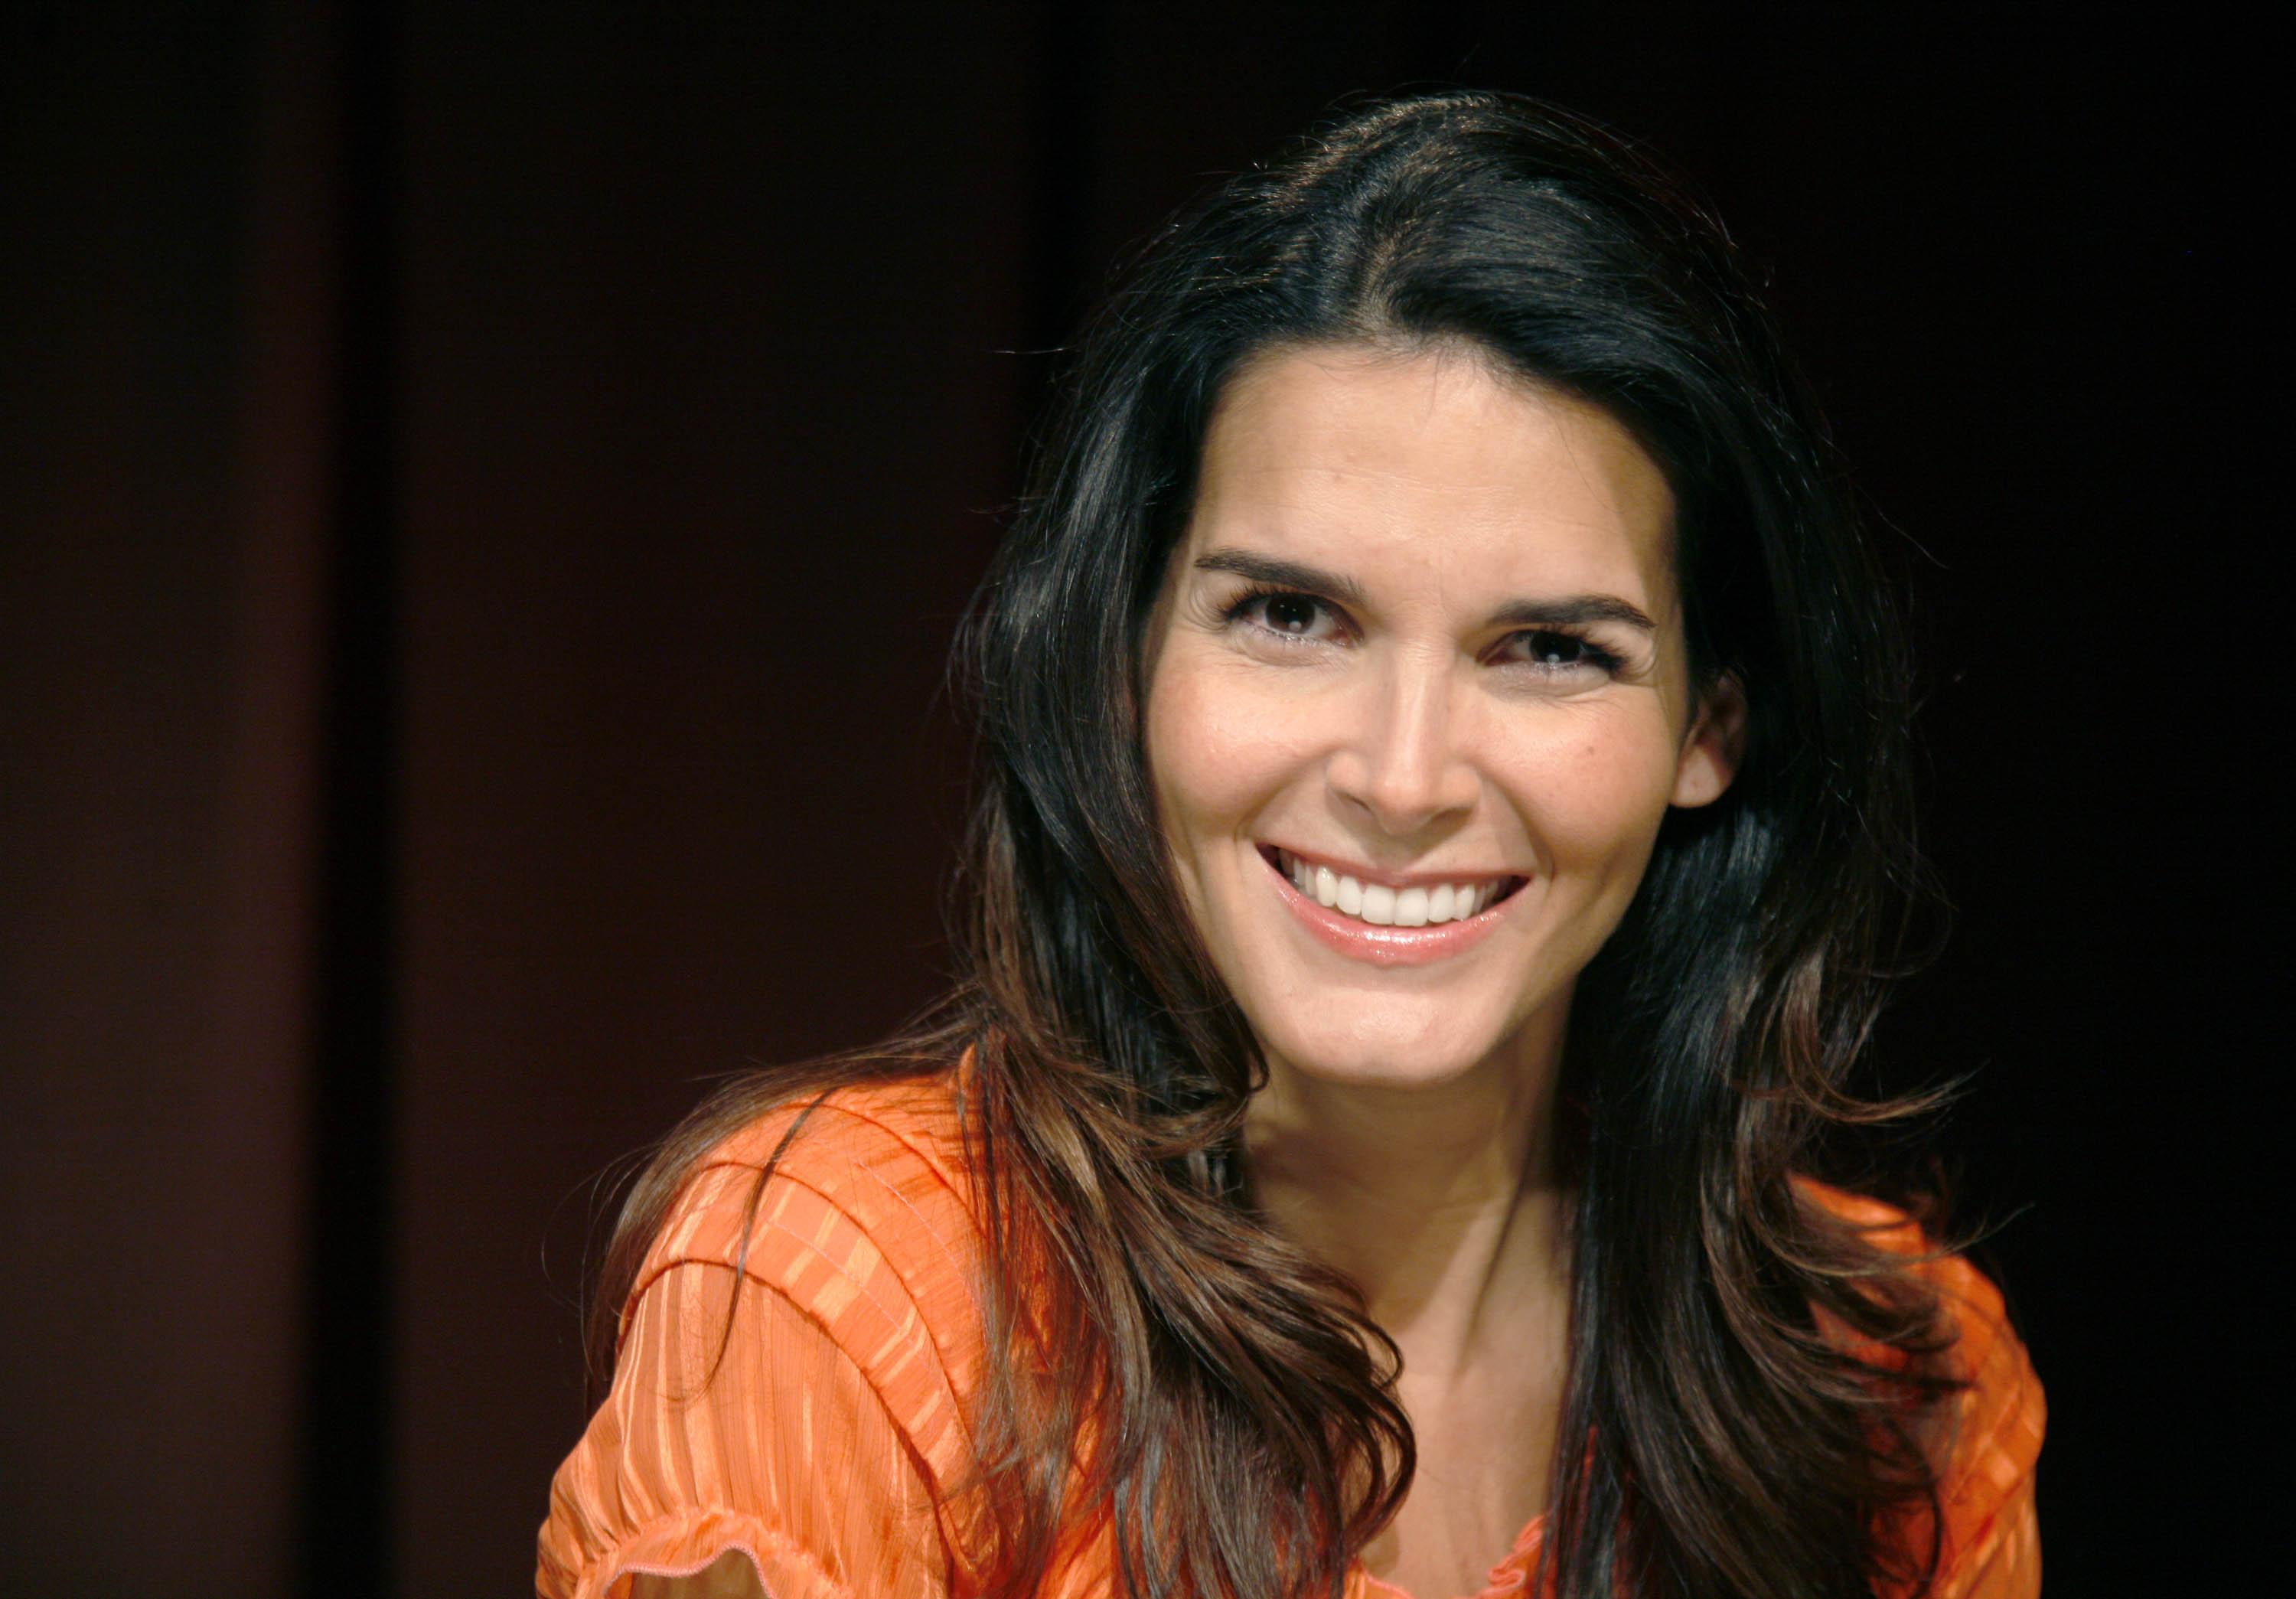 Angie Harmon Wallpapers